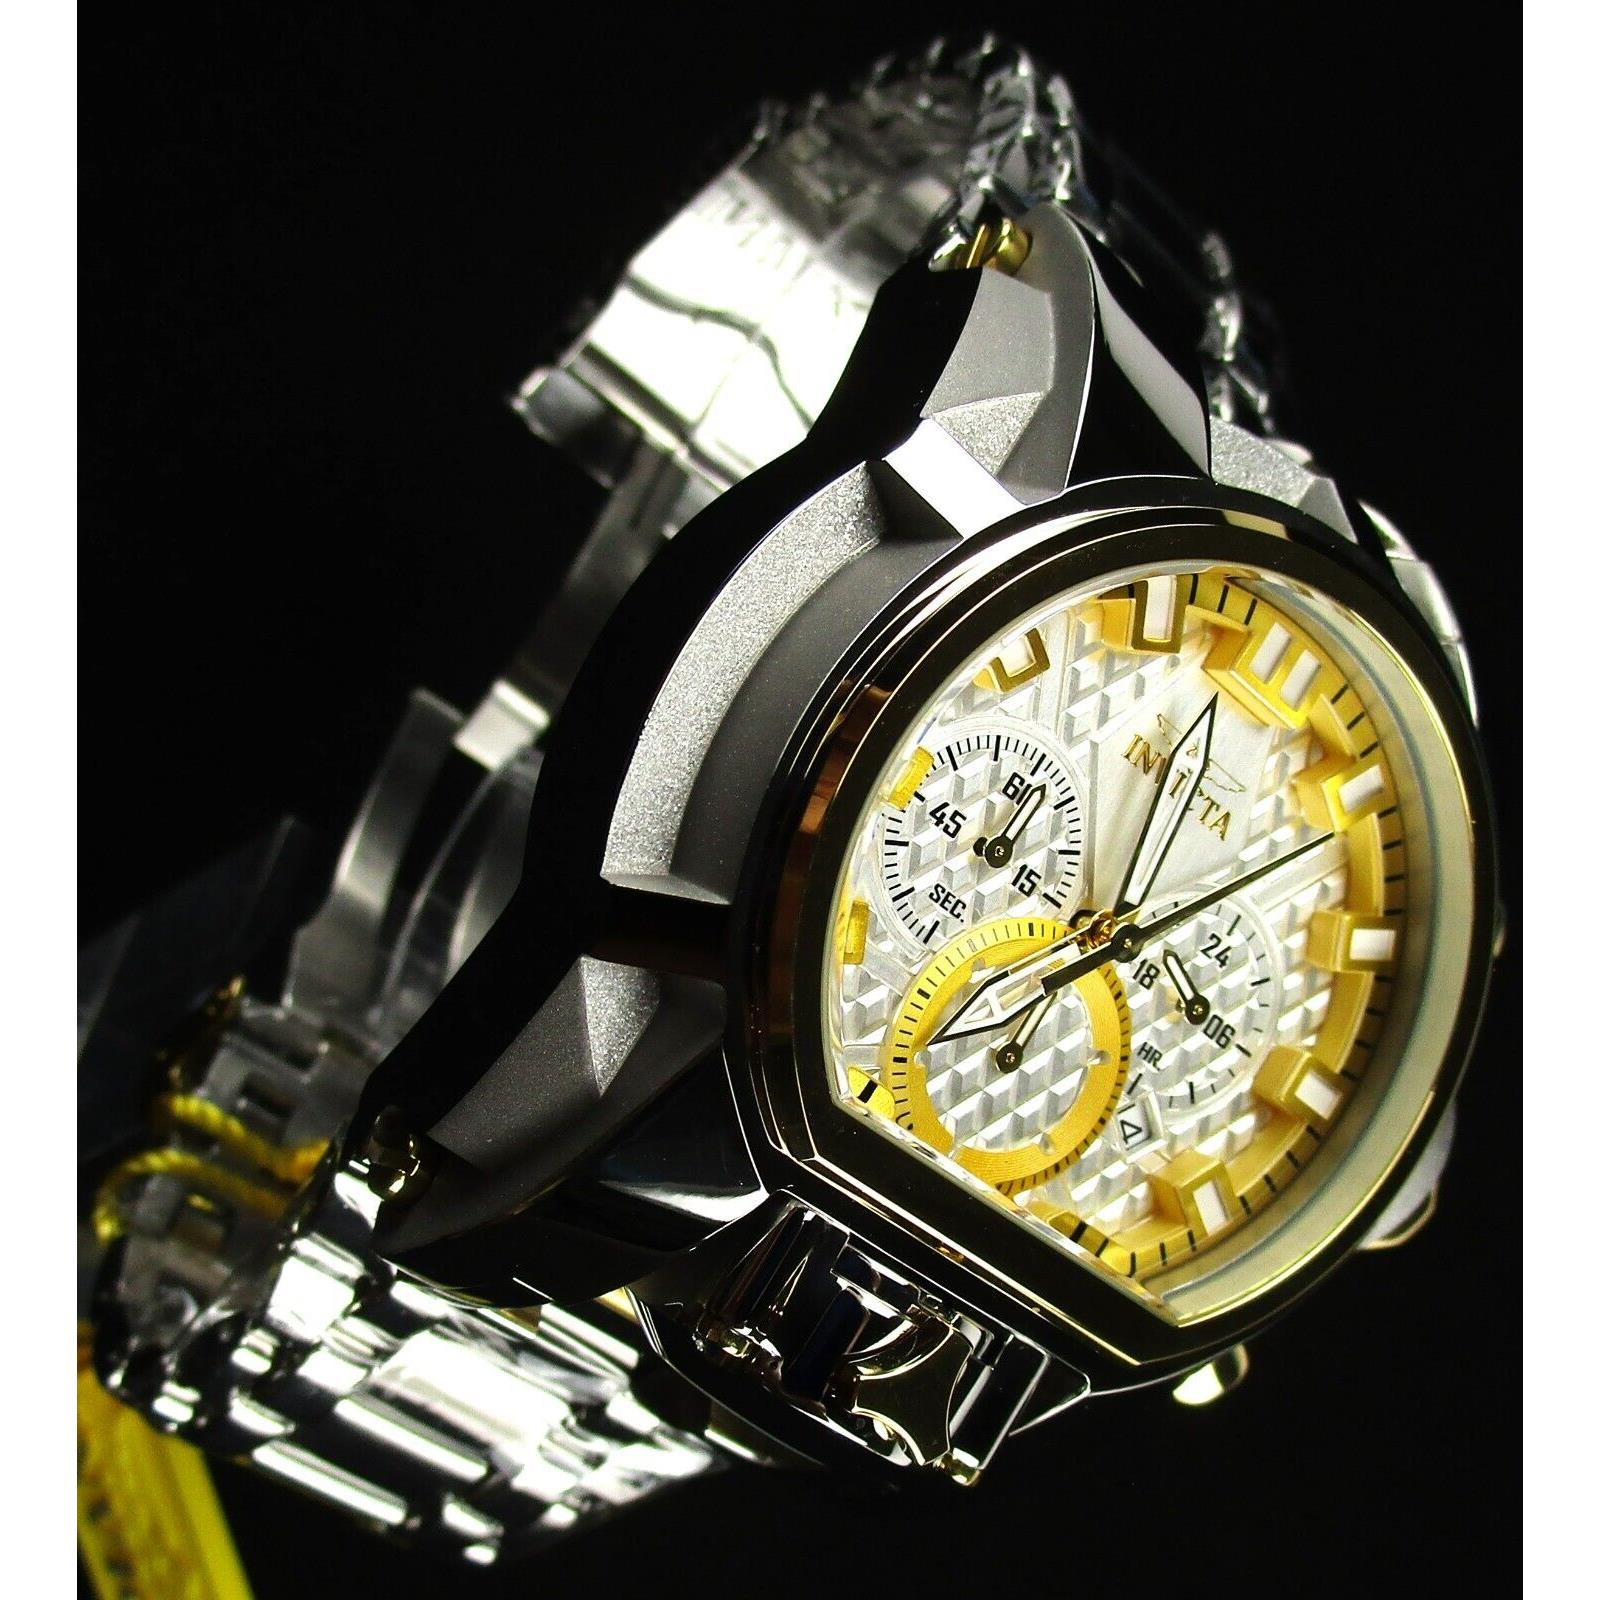 Invicta watch  - Silver w/Gold Tone Accents Dial, Polished Stainless Steel Band, Steel & Gold Tone Bezel